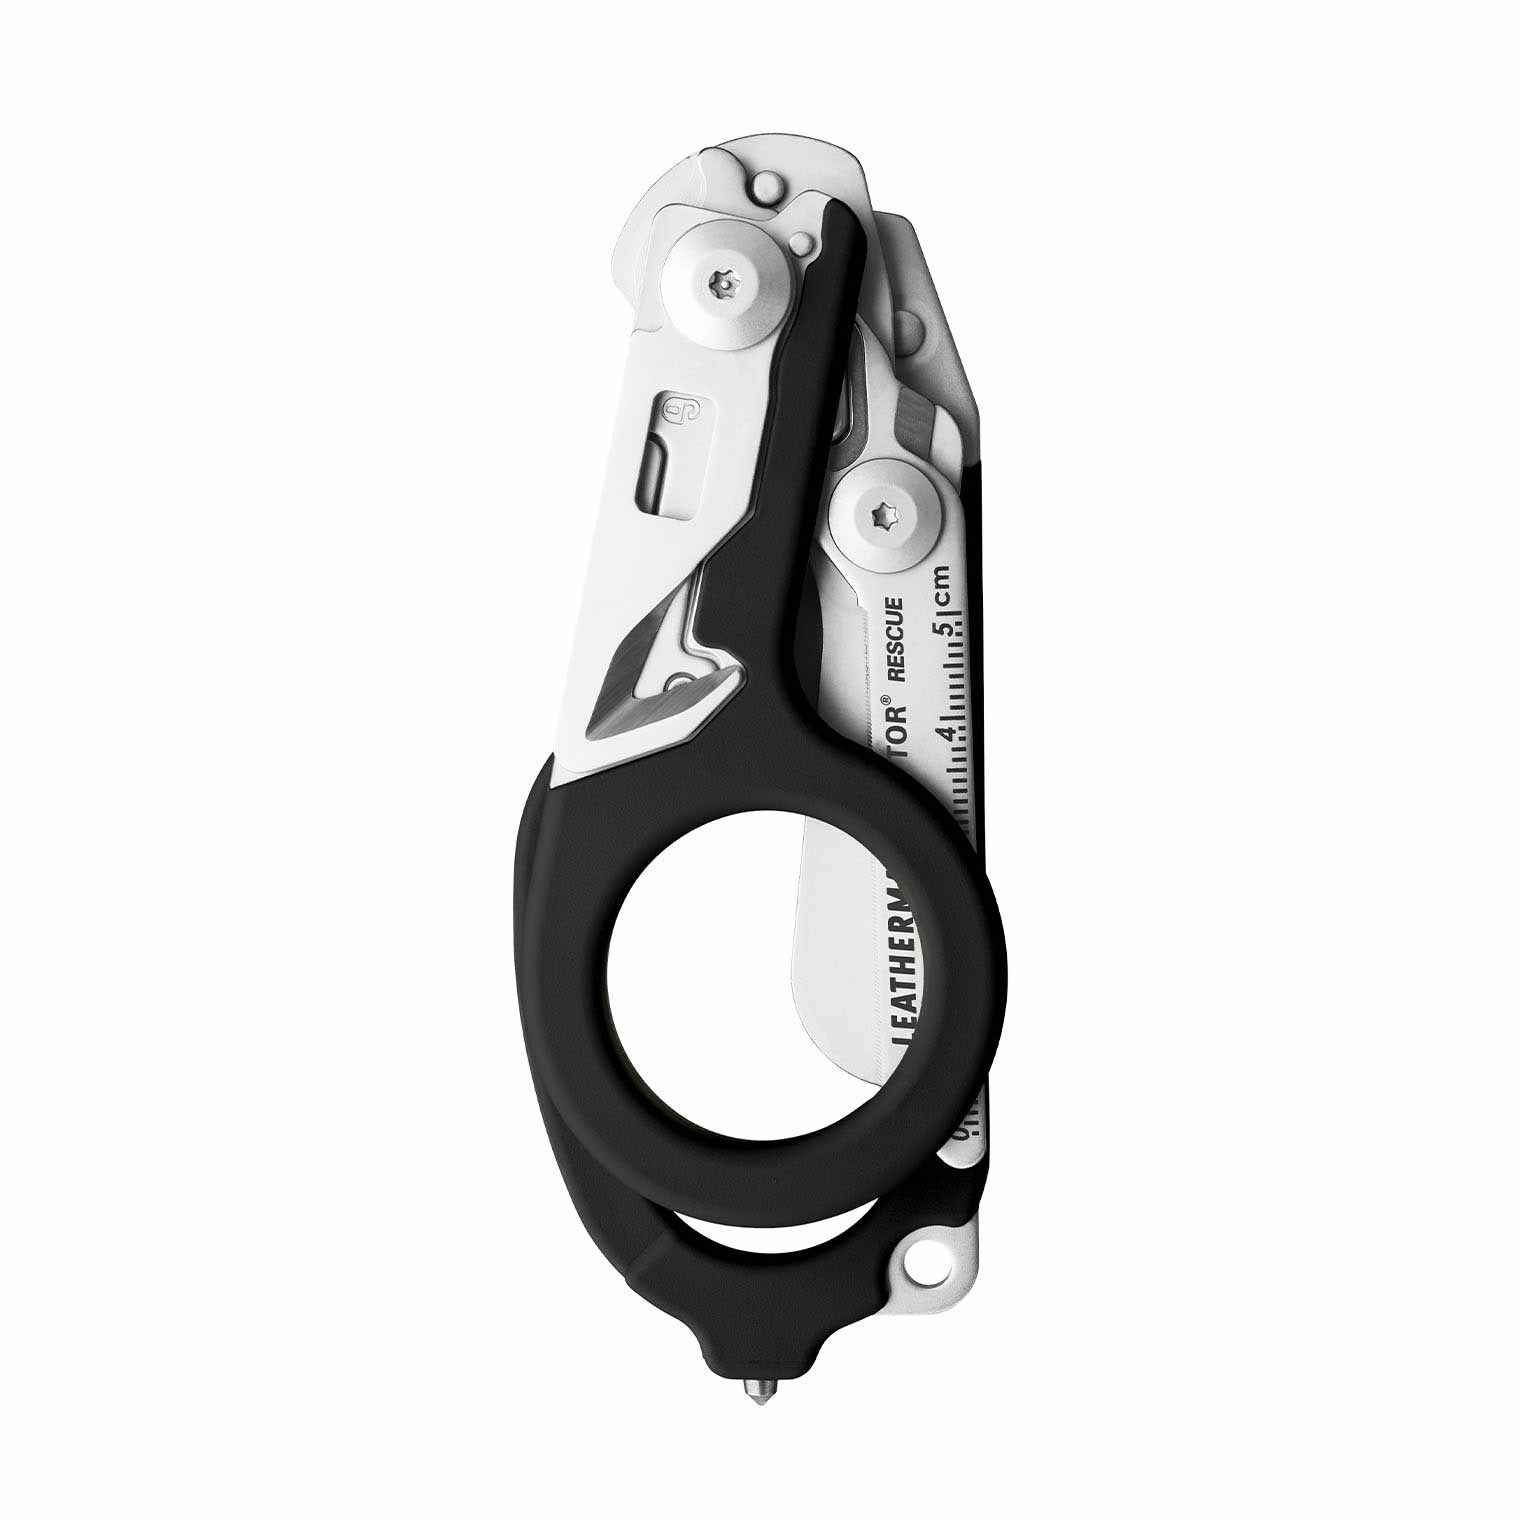 Multifunction Raptor Emergency Response Shears with Glass Break and Strap Cut L/ 